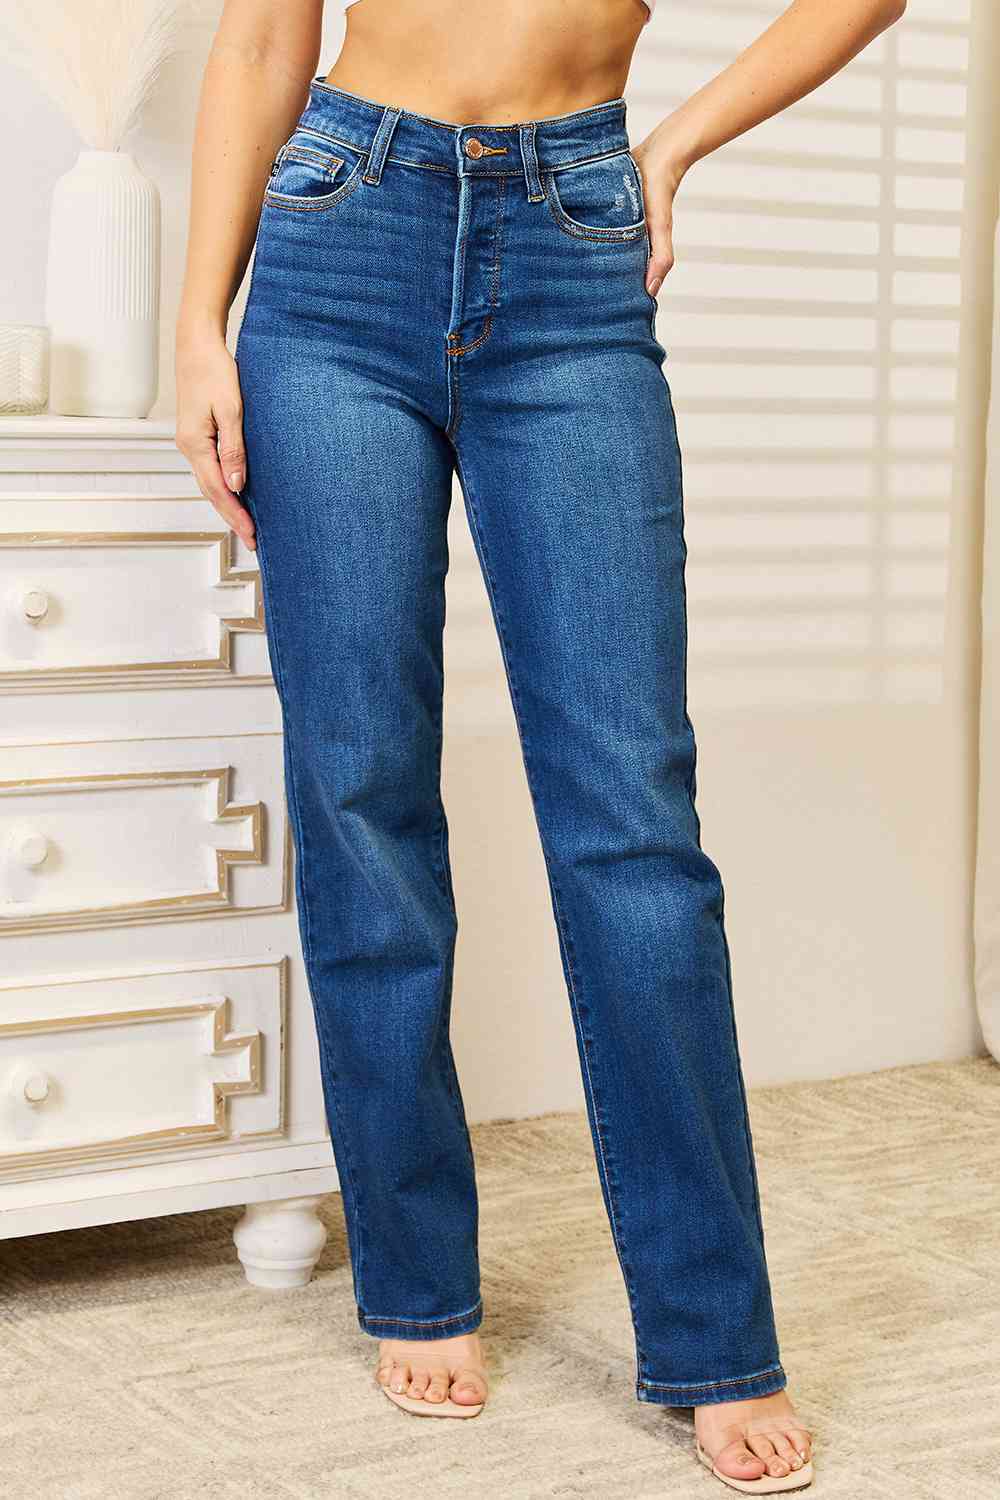 Judy Blue Full Size Straight Leg Jeans with Pockets  Krazy Heart Designs Boutique Medium 0(24) 